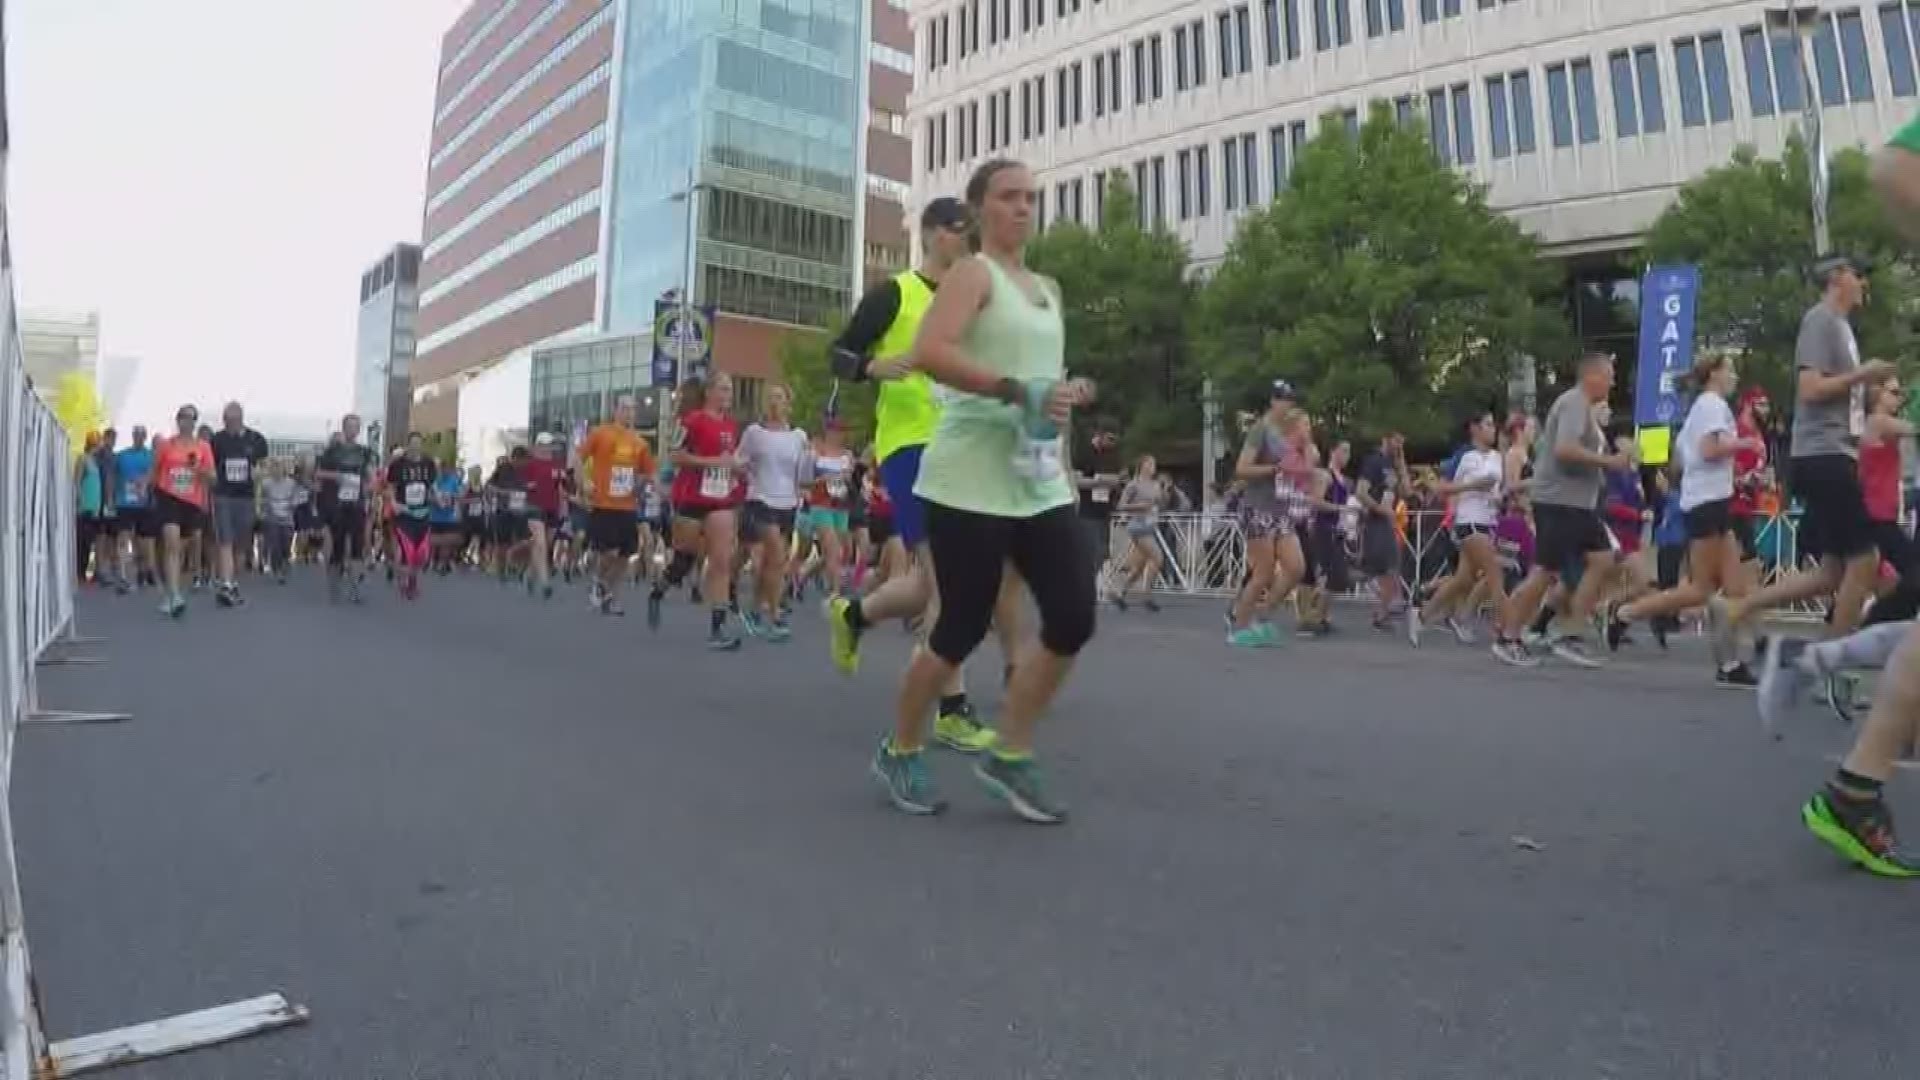 Thousands expected to flood Grand Rapids for Amway River Bank Run.